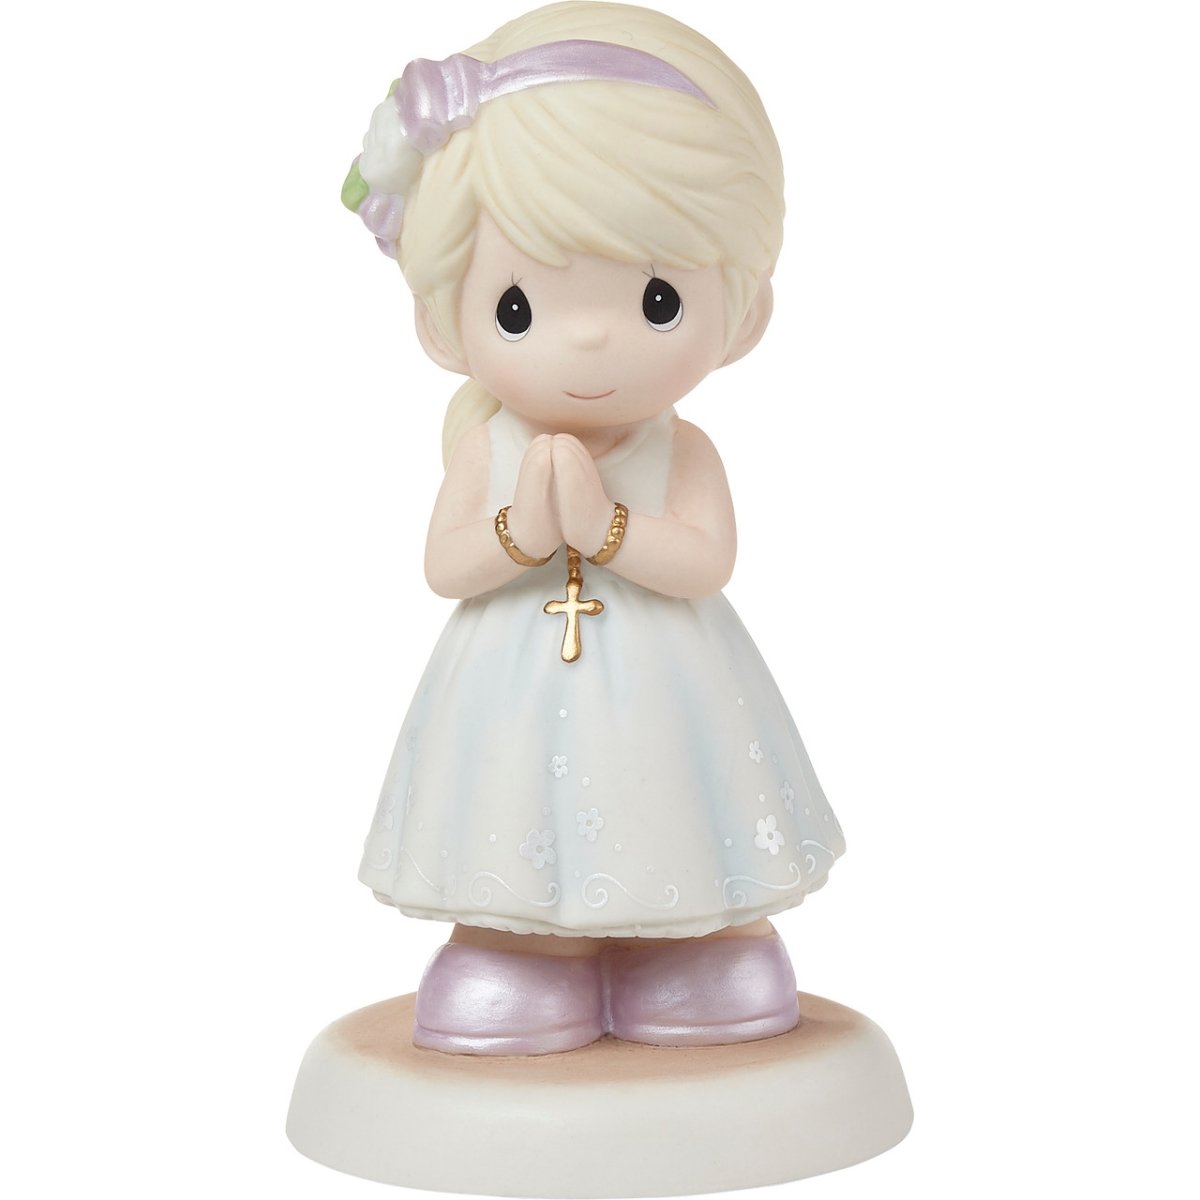 Picture of Be the Light Christian Bookstore 222021 5.5 in. Porcelain Standing Communion Girl Light Skin Blonde Hair Figurine, Multi Color